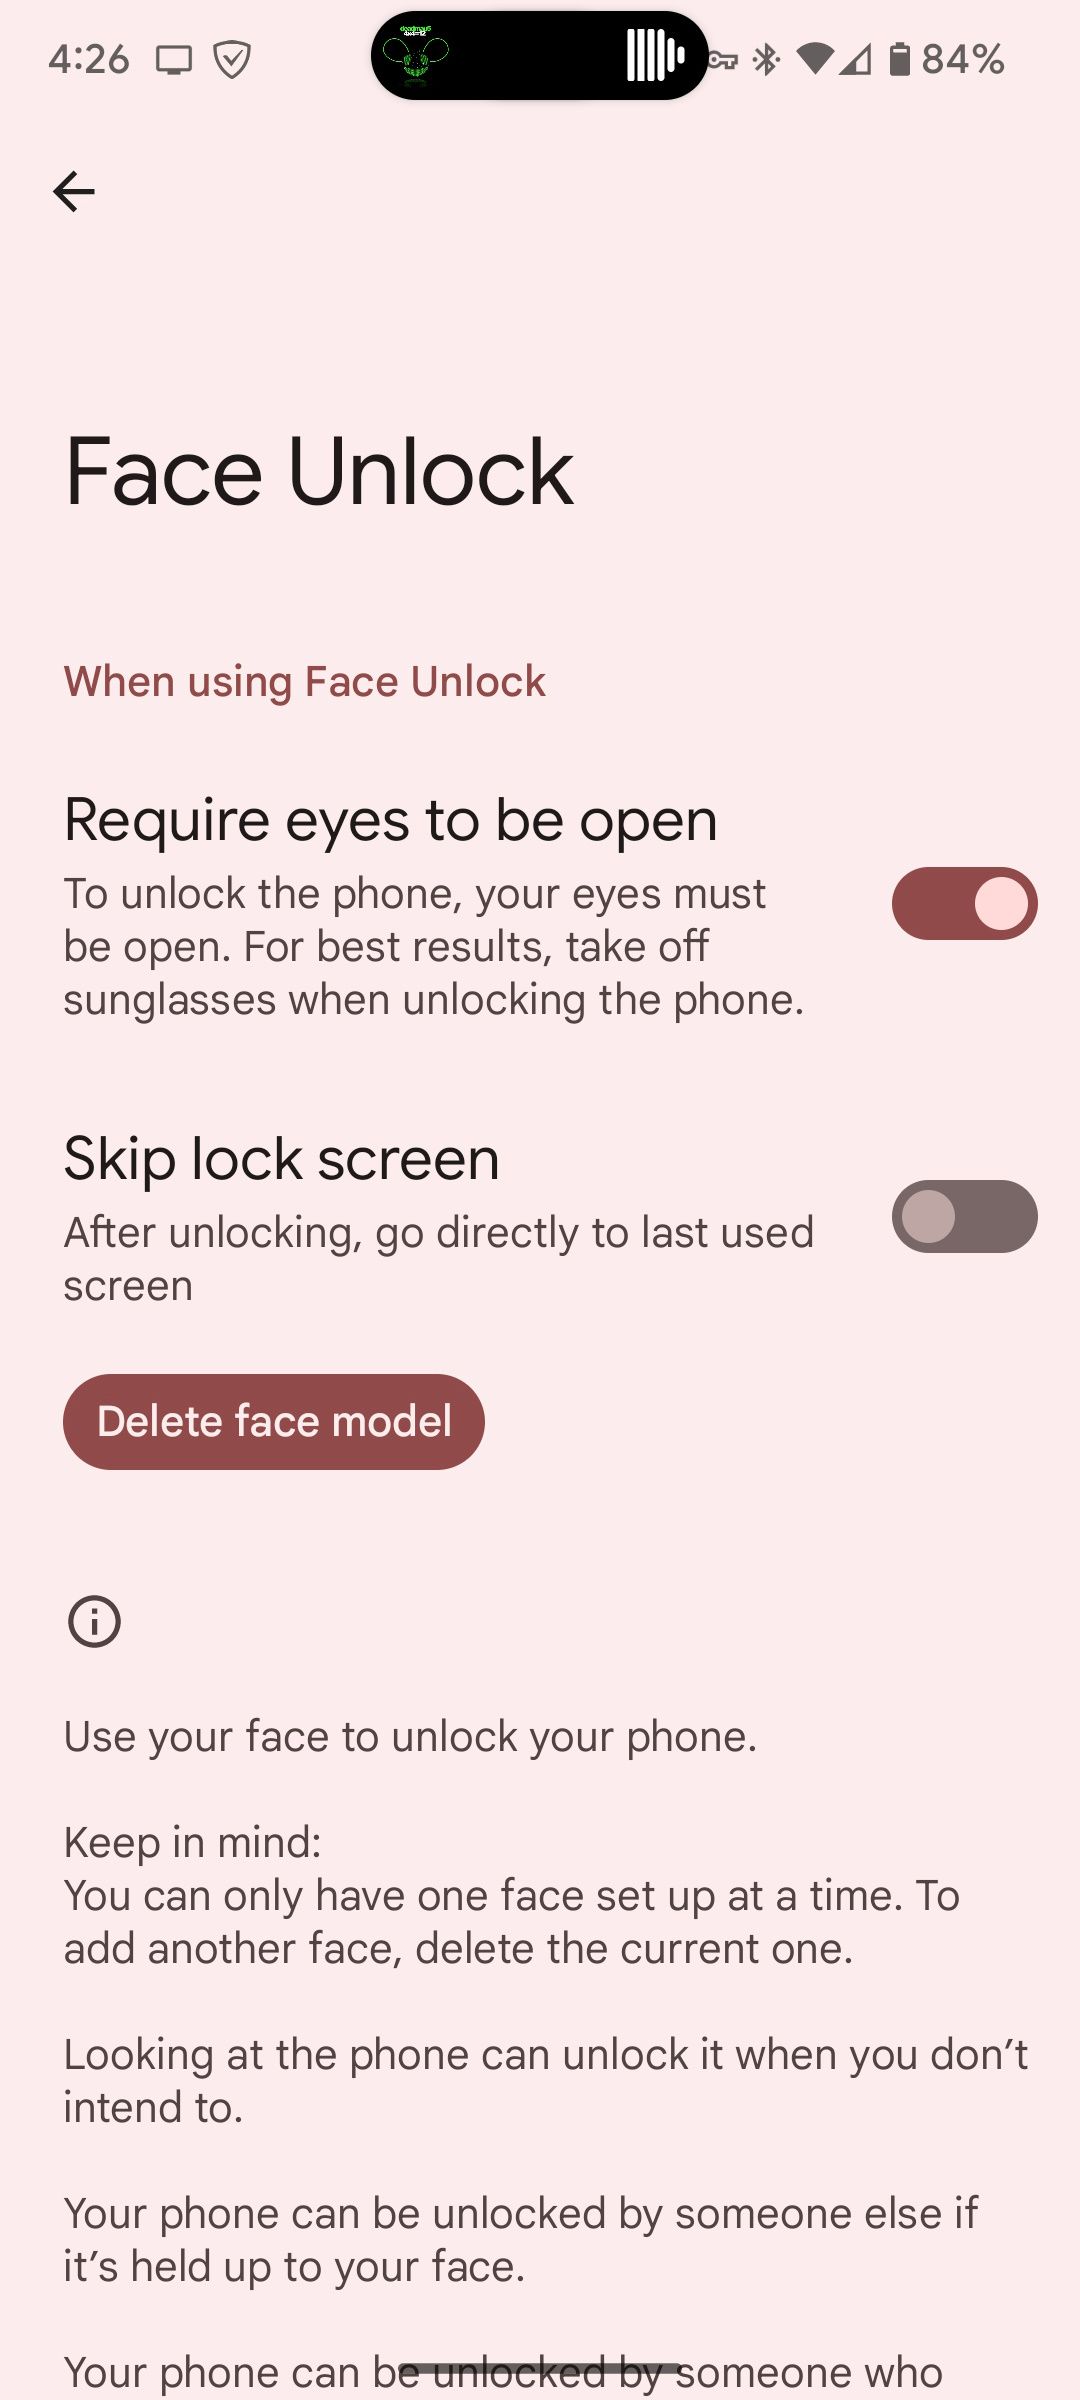 The face unlock page on Android